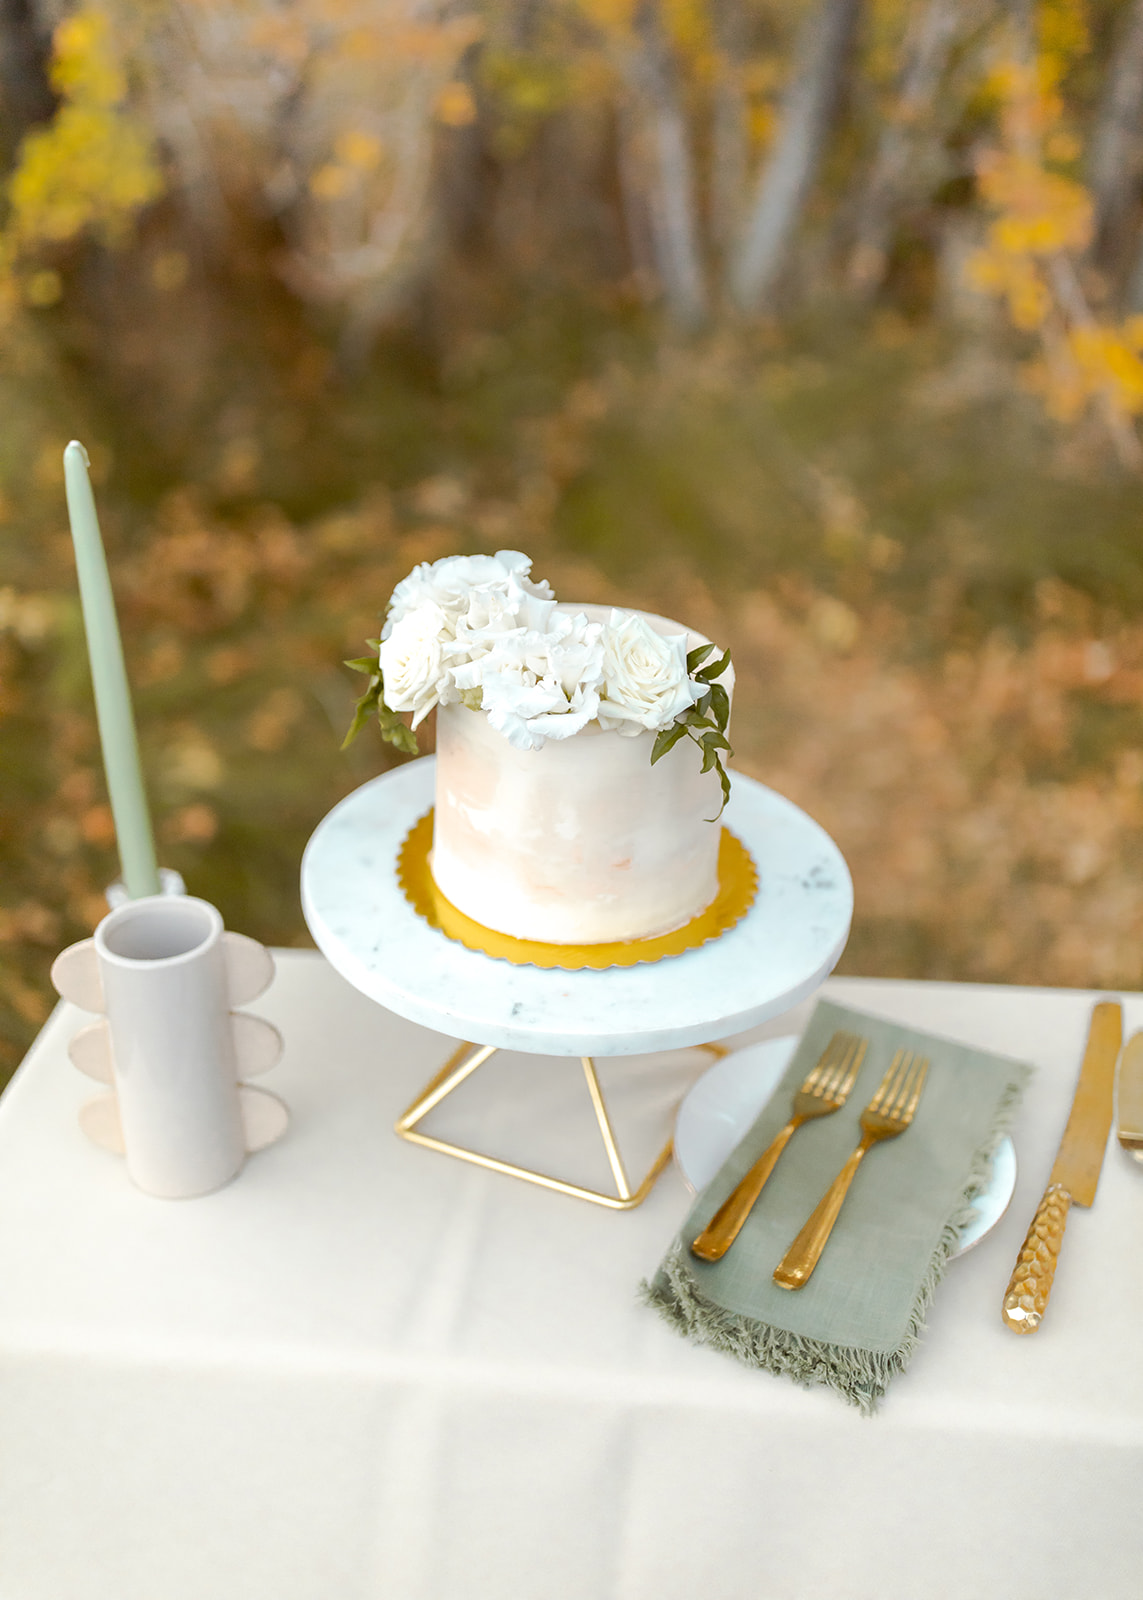 White 1 tier textured cake with sage napkins and gold flatware for white, sage, gold, and greenery fall theme